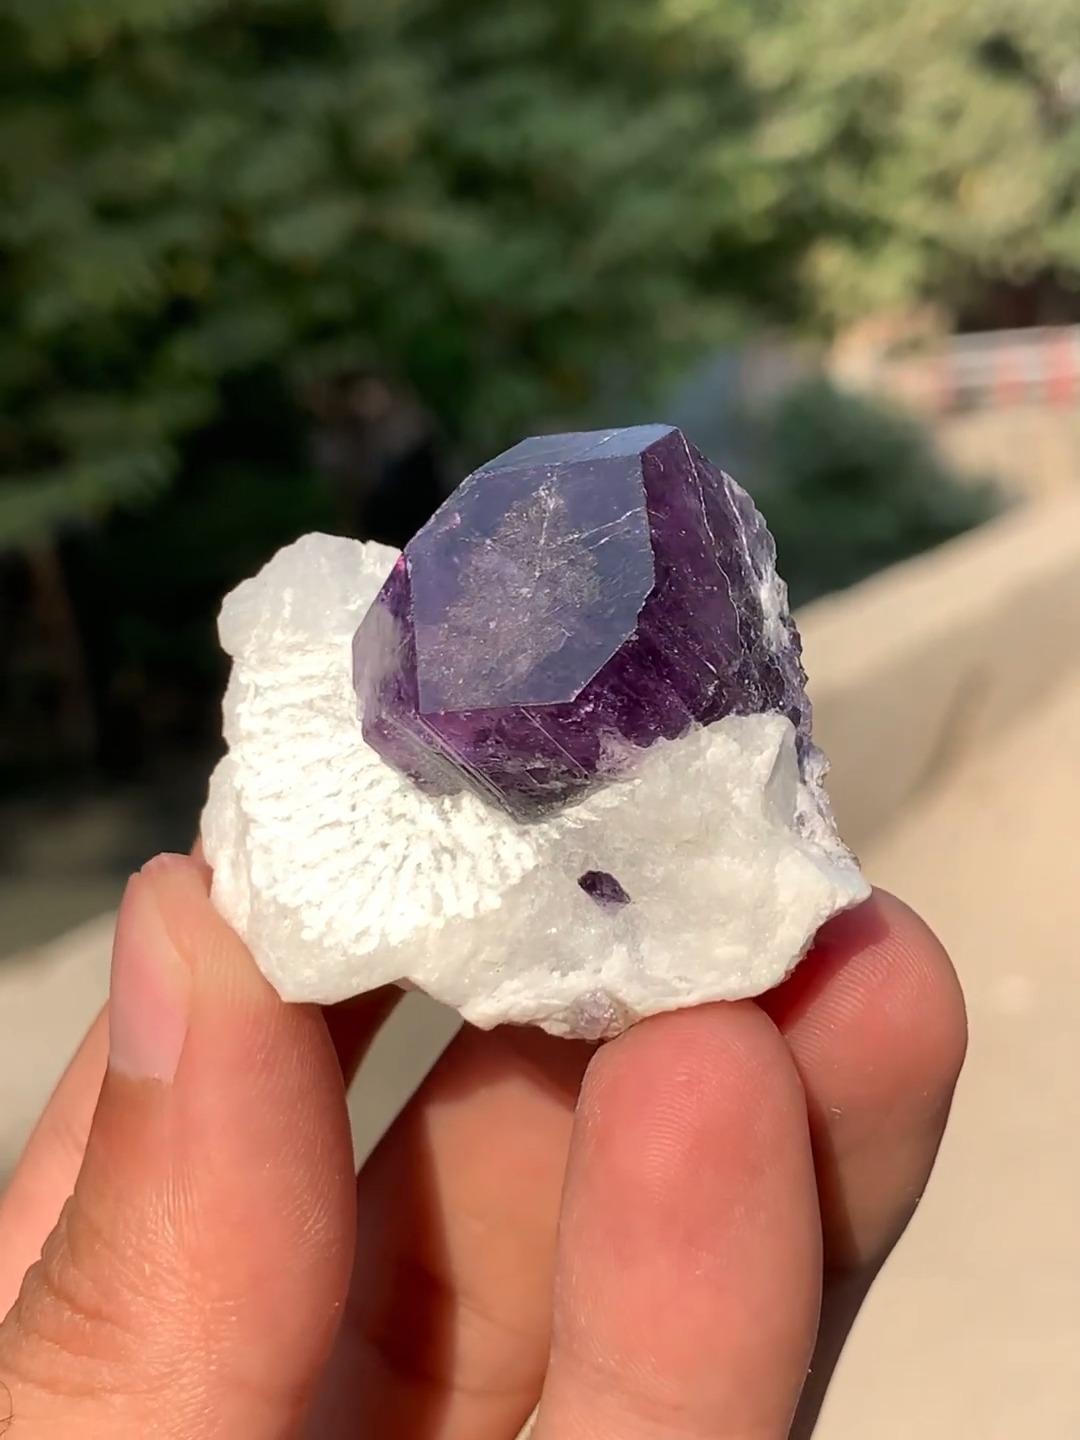 Badakhshan Province, Afghanistan 

Dim: H: 3.7 x W: 4.3 x D: 2.5 cm

Wt: 35 g

Specimen Type: Very aesthetic and rare gem quality vibrant purple color Scapolite on Calcite 

Treatment: None 

Color: Purple 





Vibrant purple Scapolite crystals on